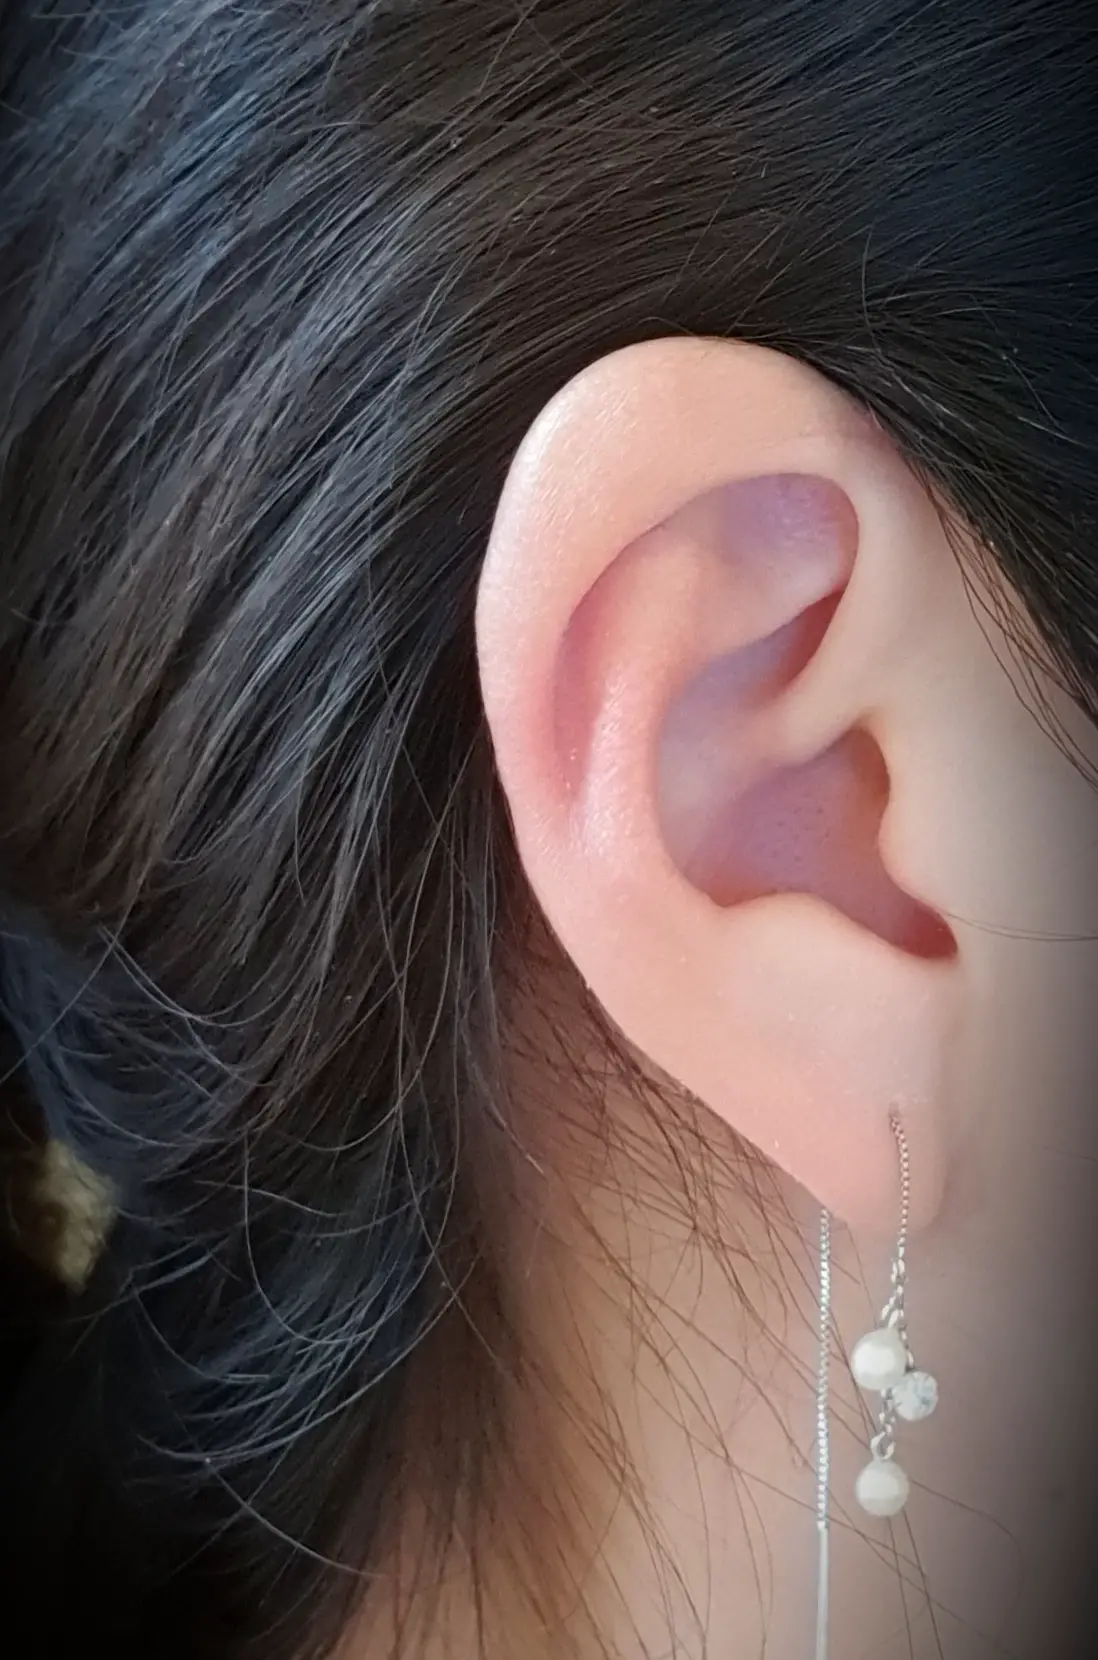 How much does it cost to get your ears cartilage tragus pierced